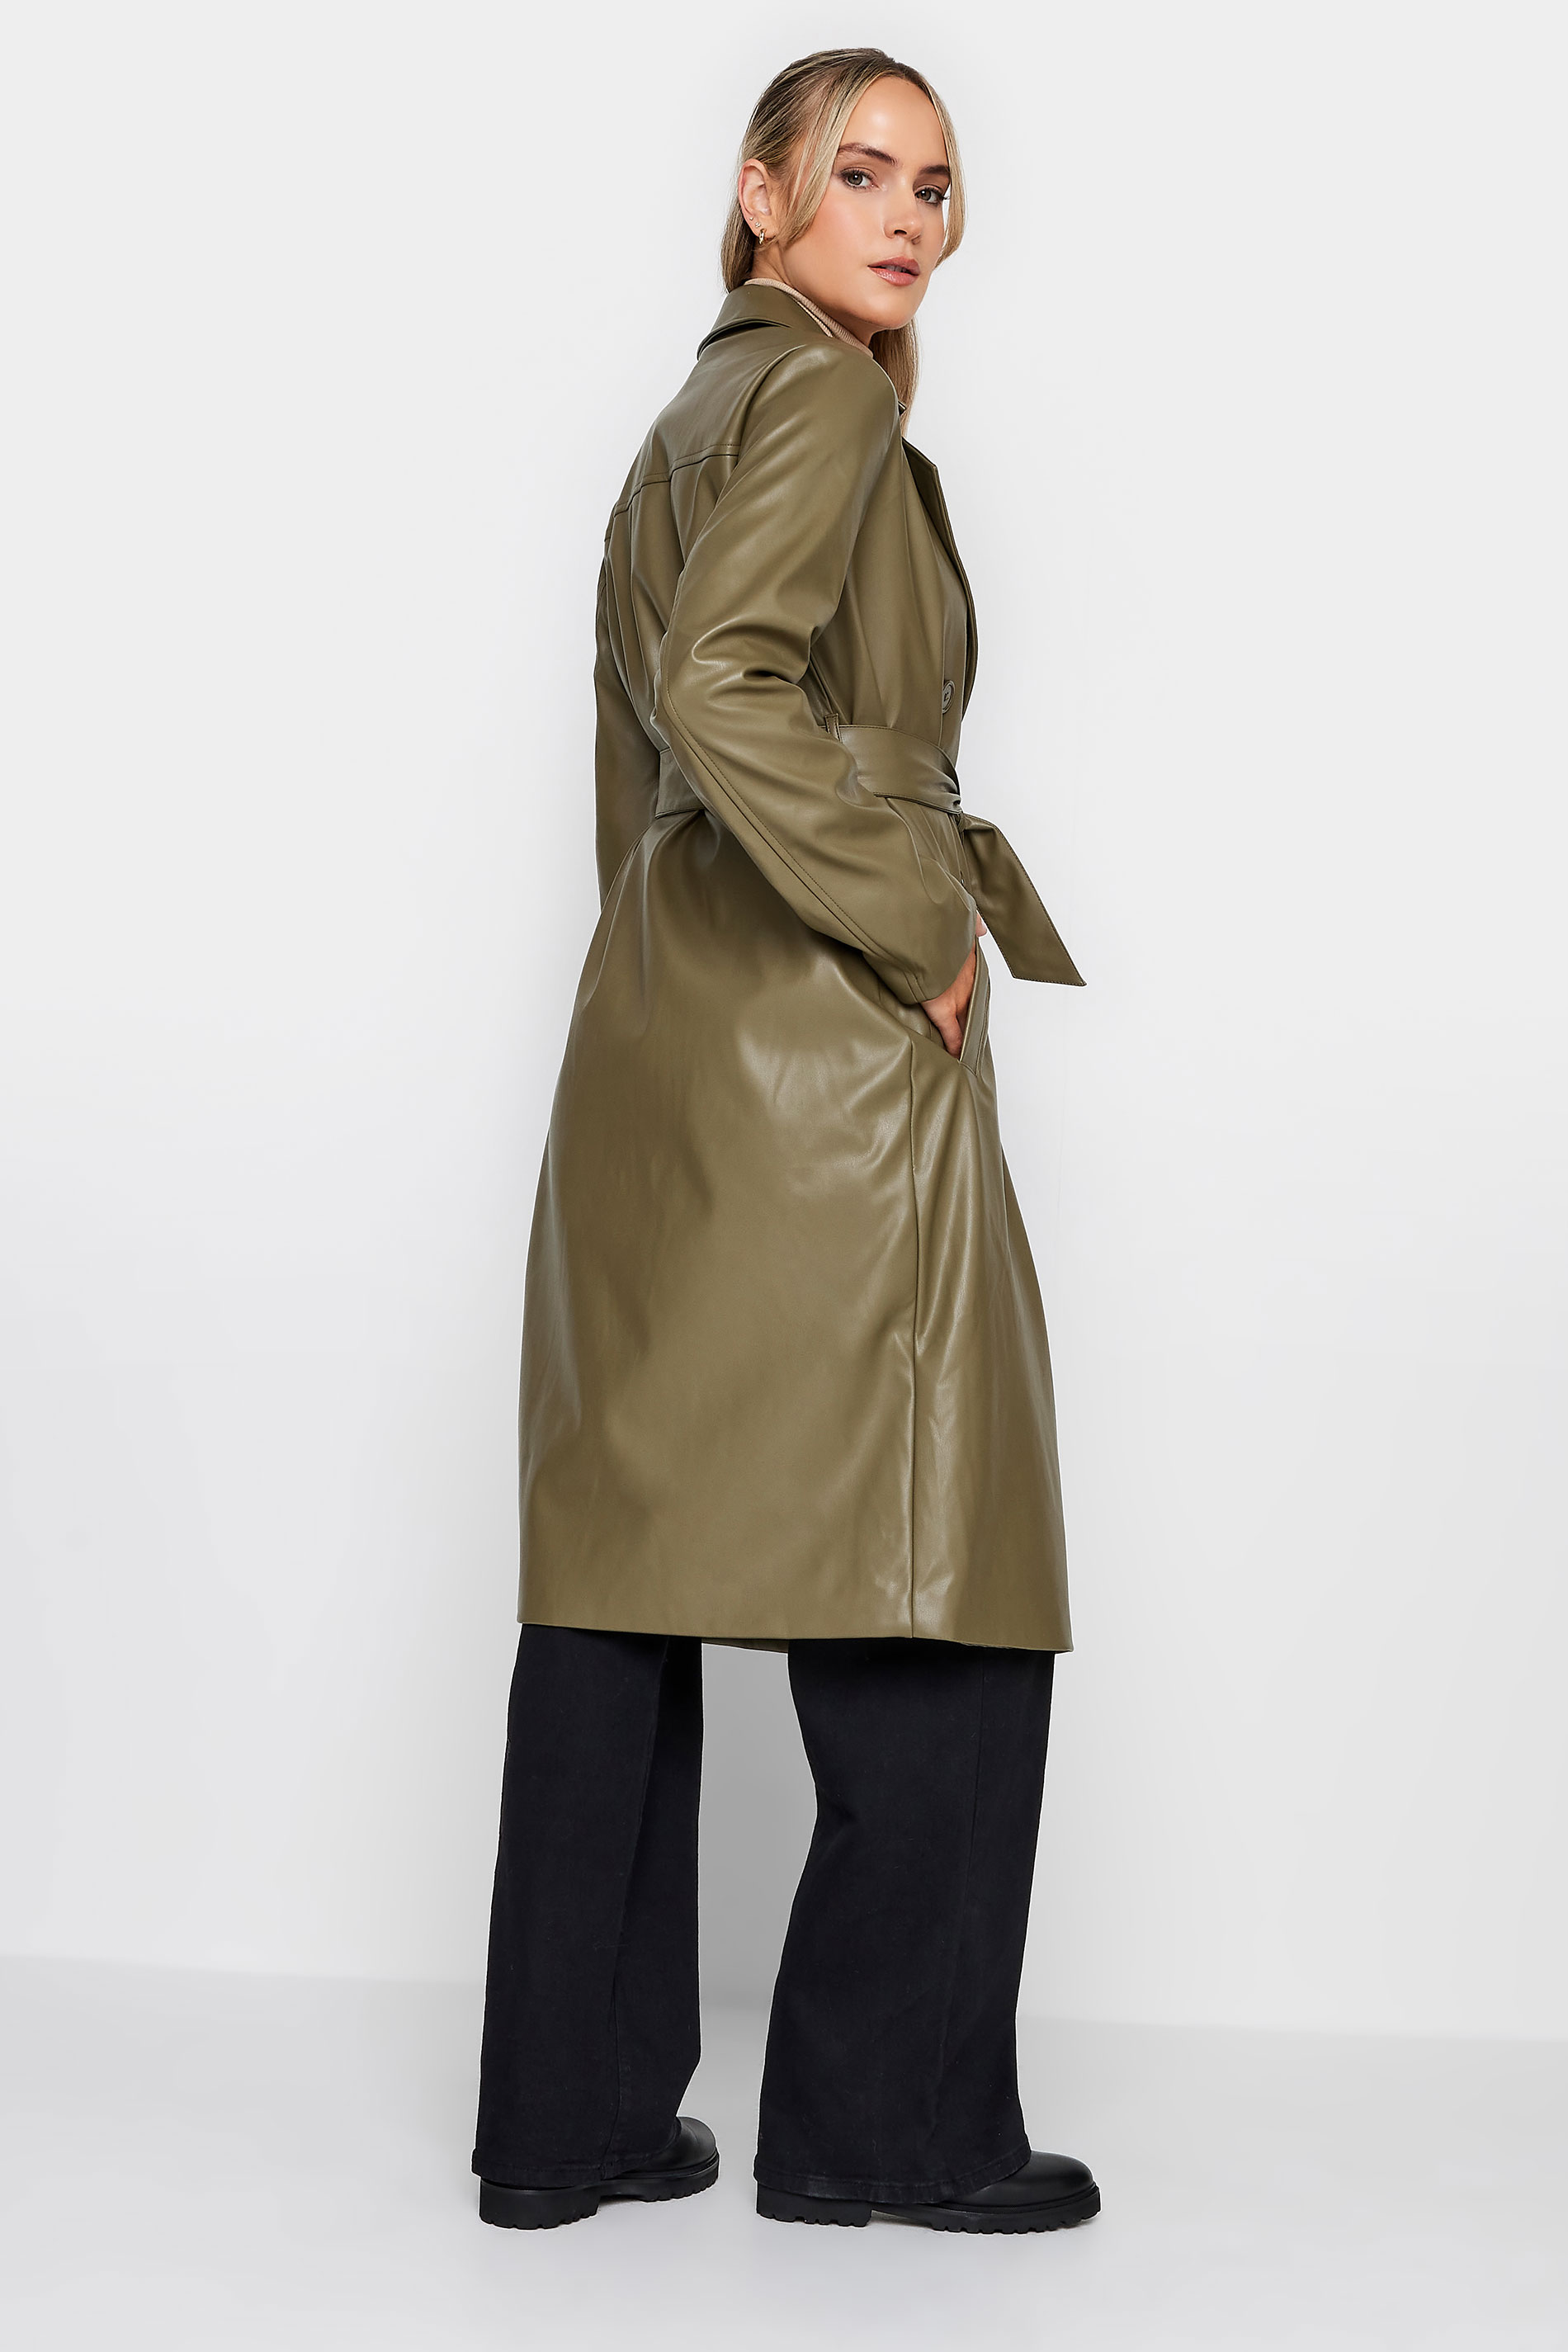 LTS Tall Olive Green Faux Leather Trench Coat | Long Tall Sally 3